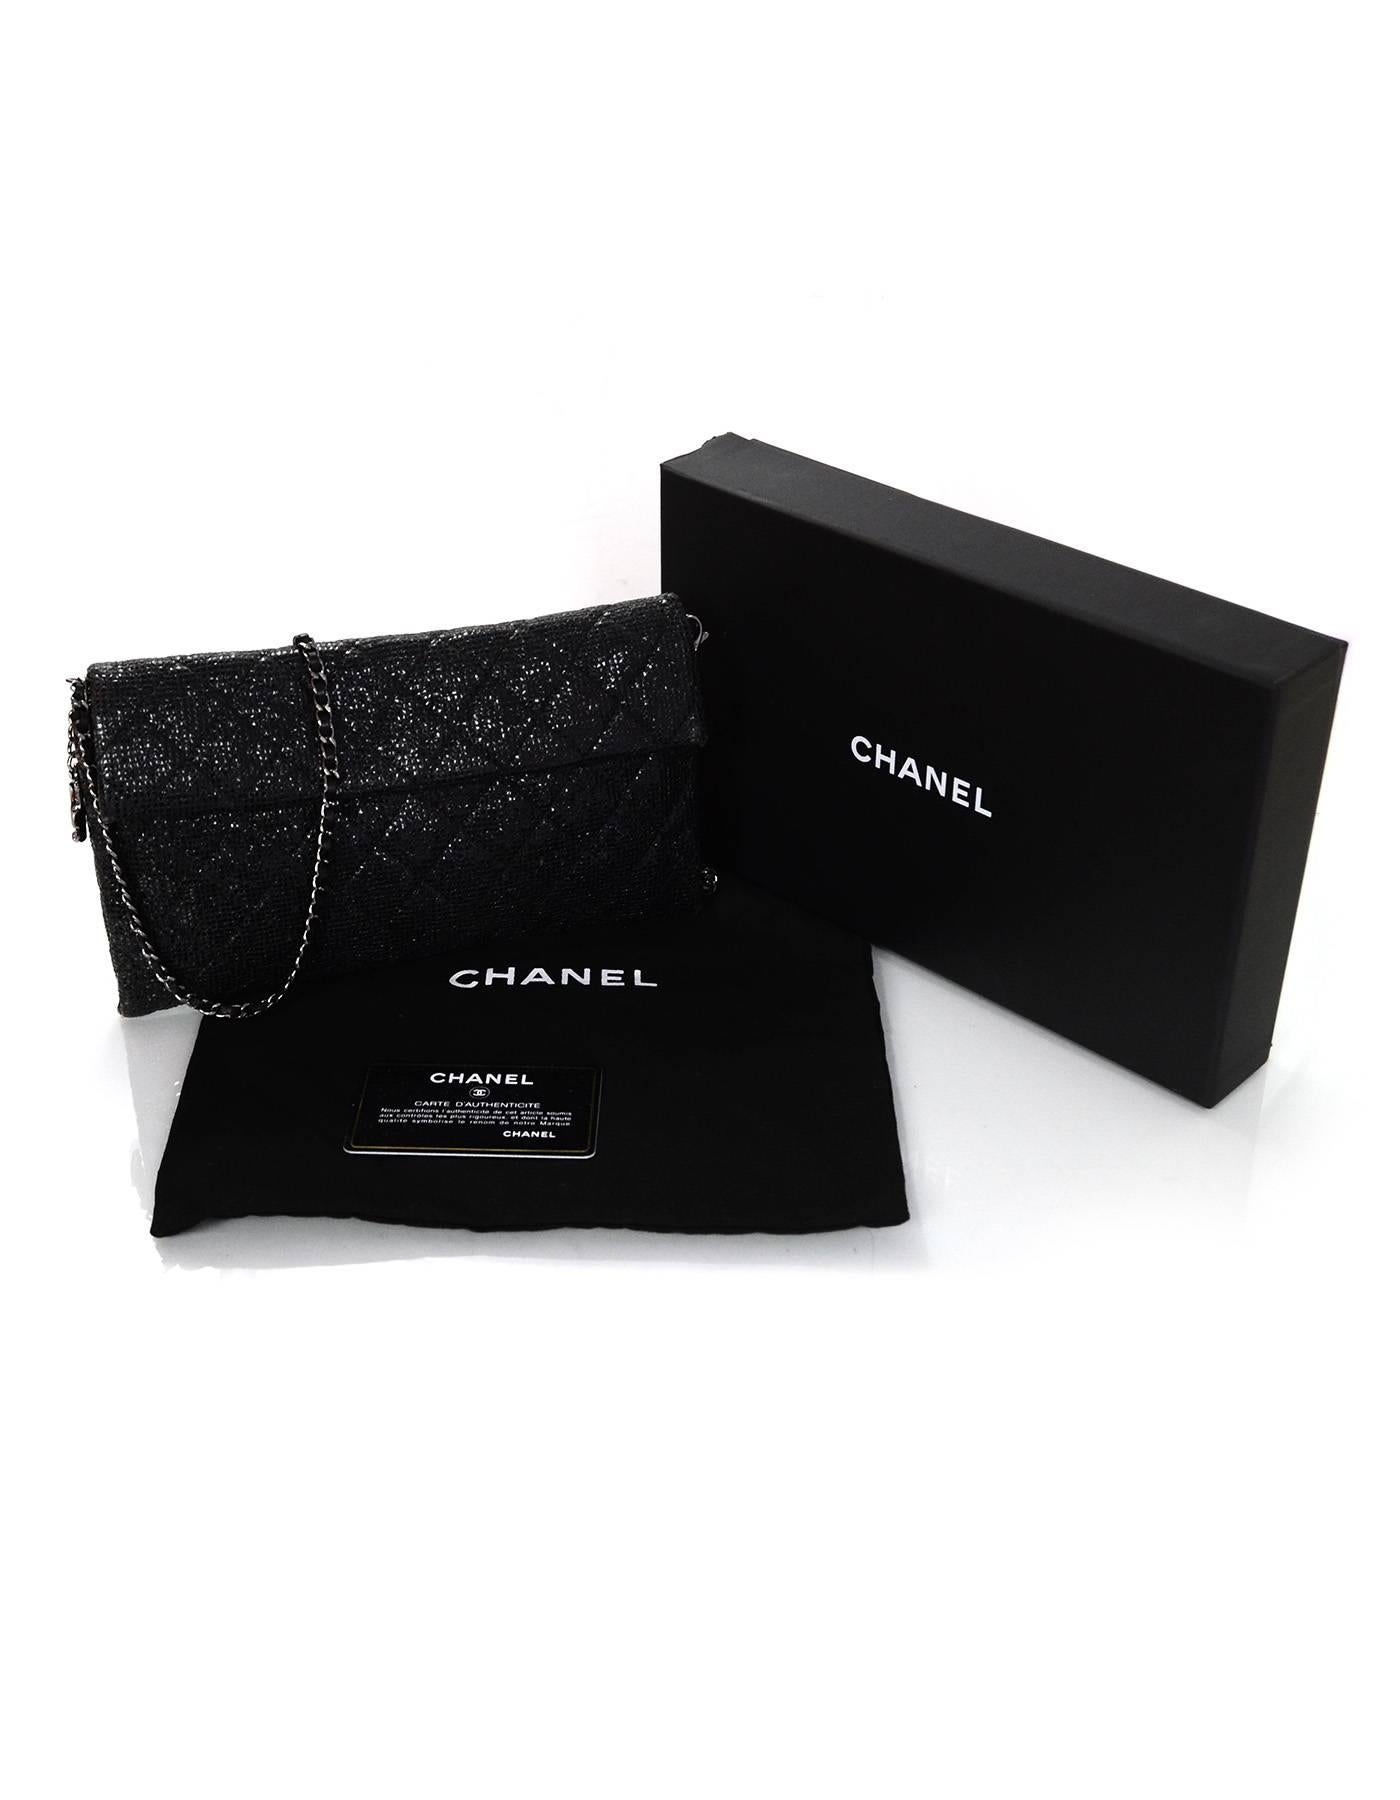 Chanel Black Glitter Quilted Crossbody/Clutch Bag with Box 2